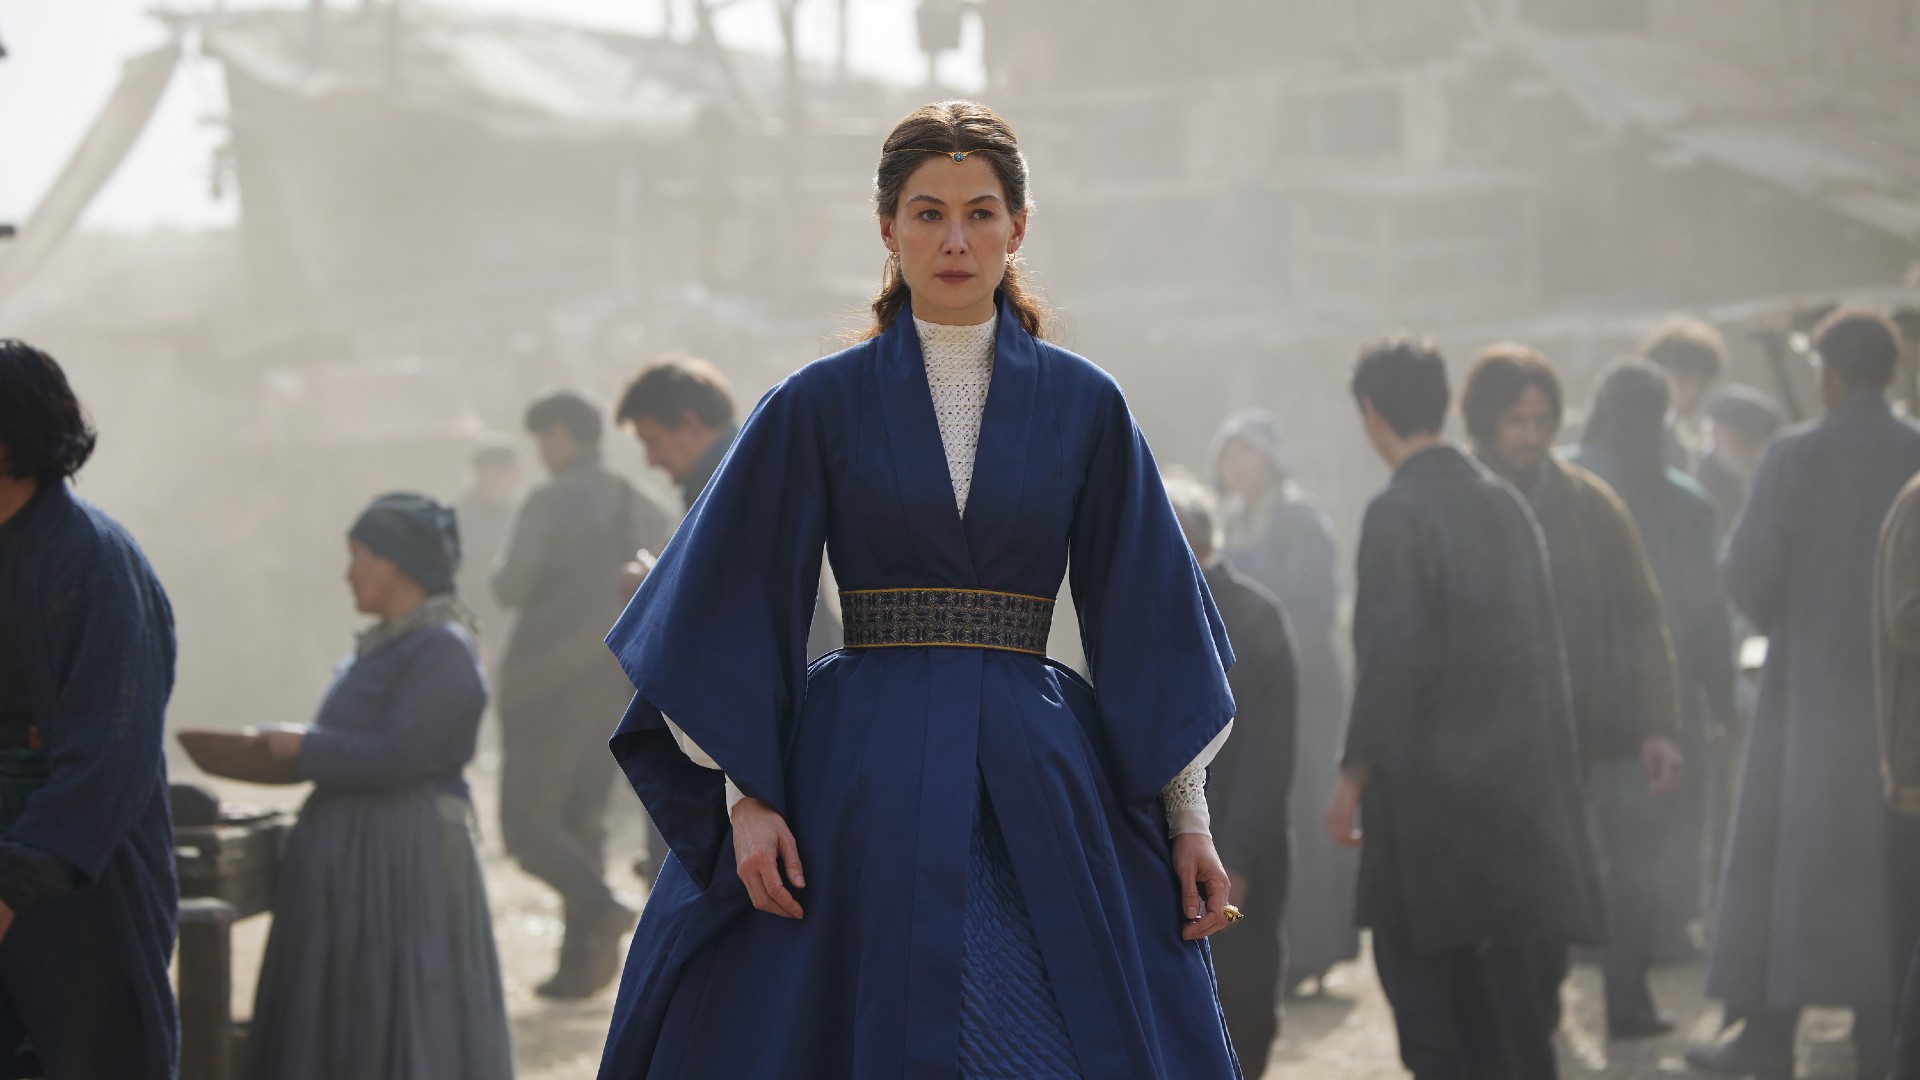 Rosamund Pike as Moiraine in The Wheel of Time season 2